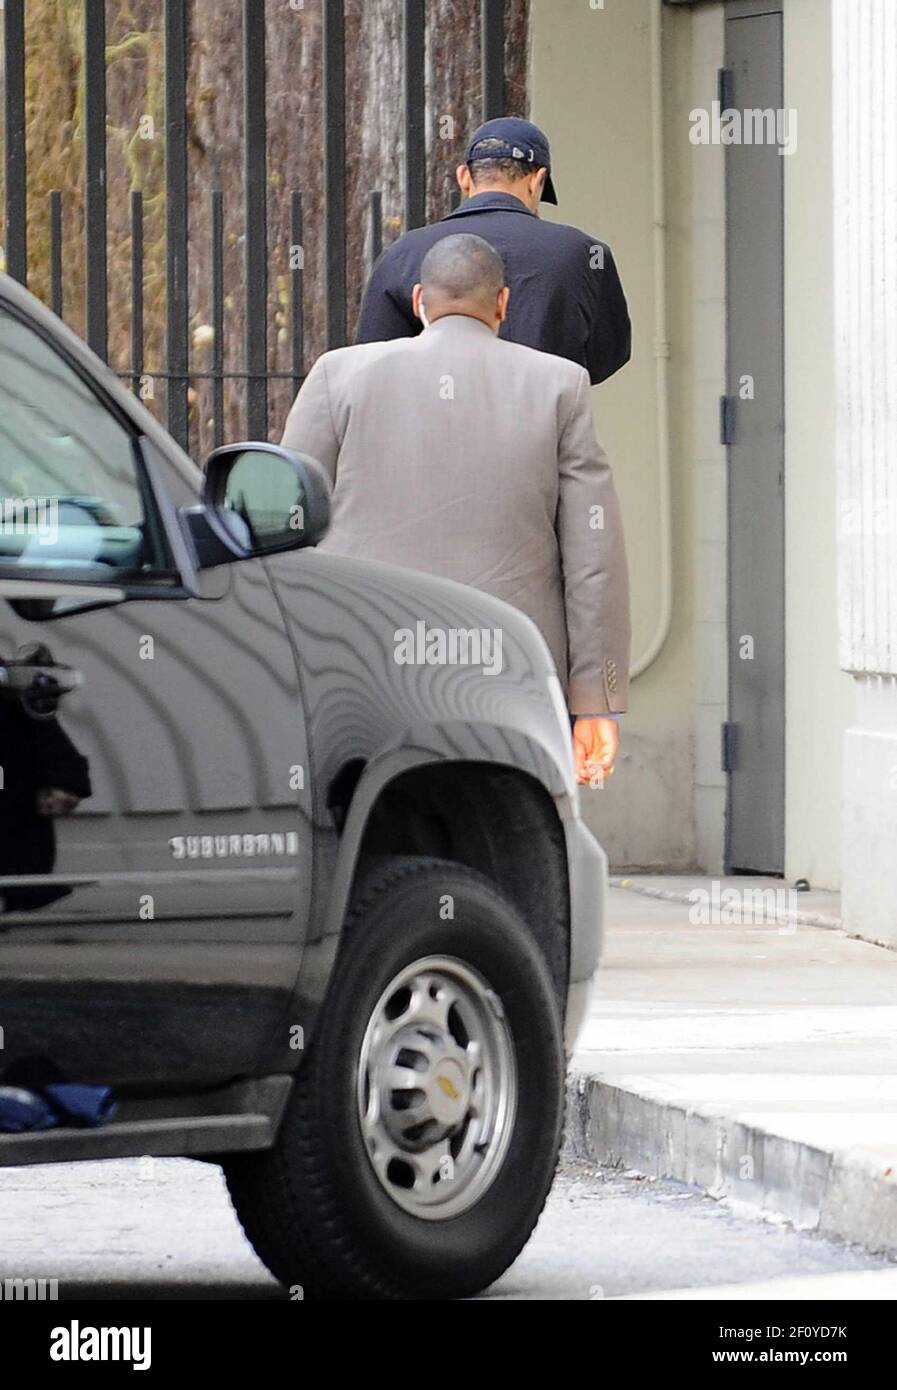 20 November 2008 - Chicago, Illinois - US President elect Barack Obama is followed by a Secret Service agent as he arrives at his gym for a morning workout in Chicago, Illinois, USA 20 November2009. Obama will be inaugurated on 20 January 2009 as the 44th president.Photo Credit: Tannen Maury/Pool/Sipa Press/0811201805 Stock Photo